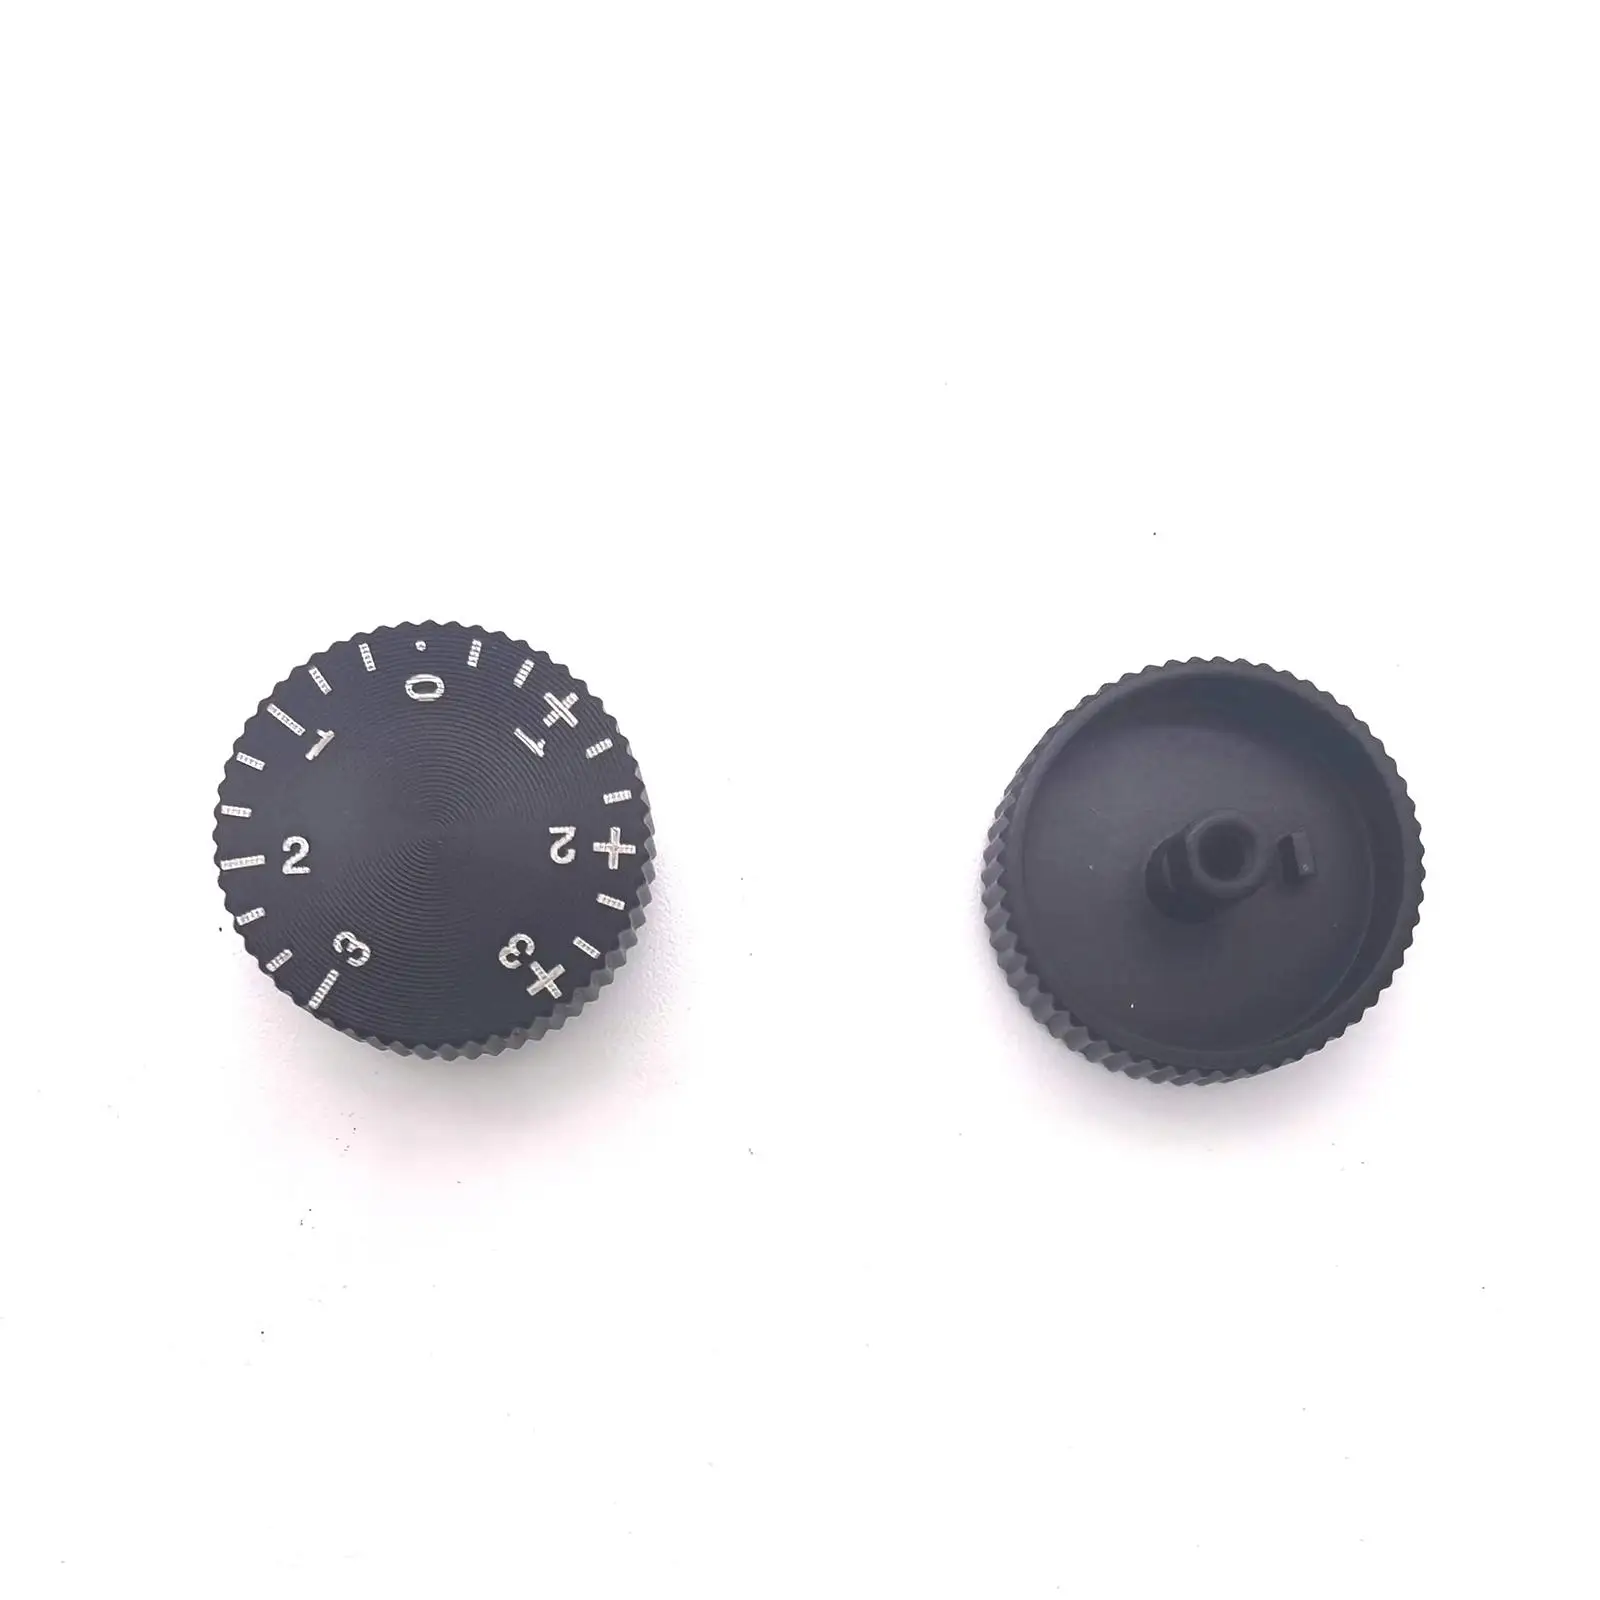 Durable Mode Dial Top Cover Black Nameplate Button Lid for A72 A7RM2 A7R2 Replaces